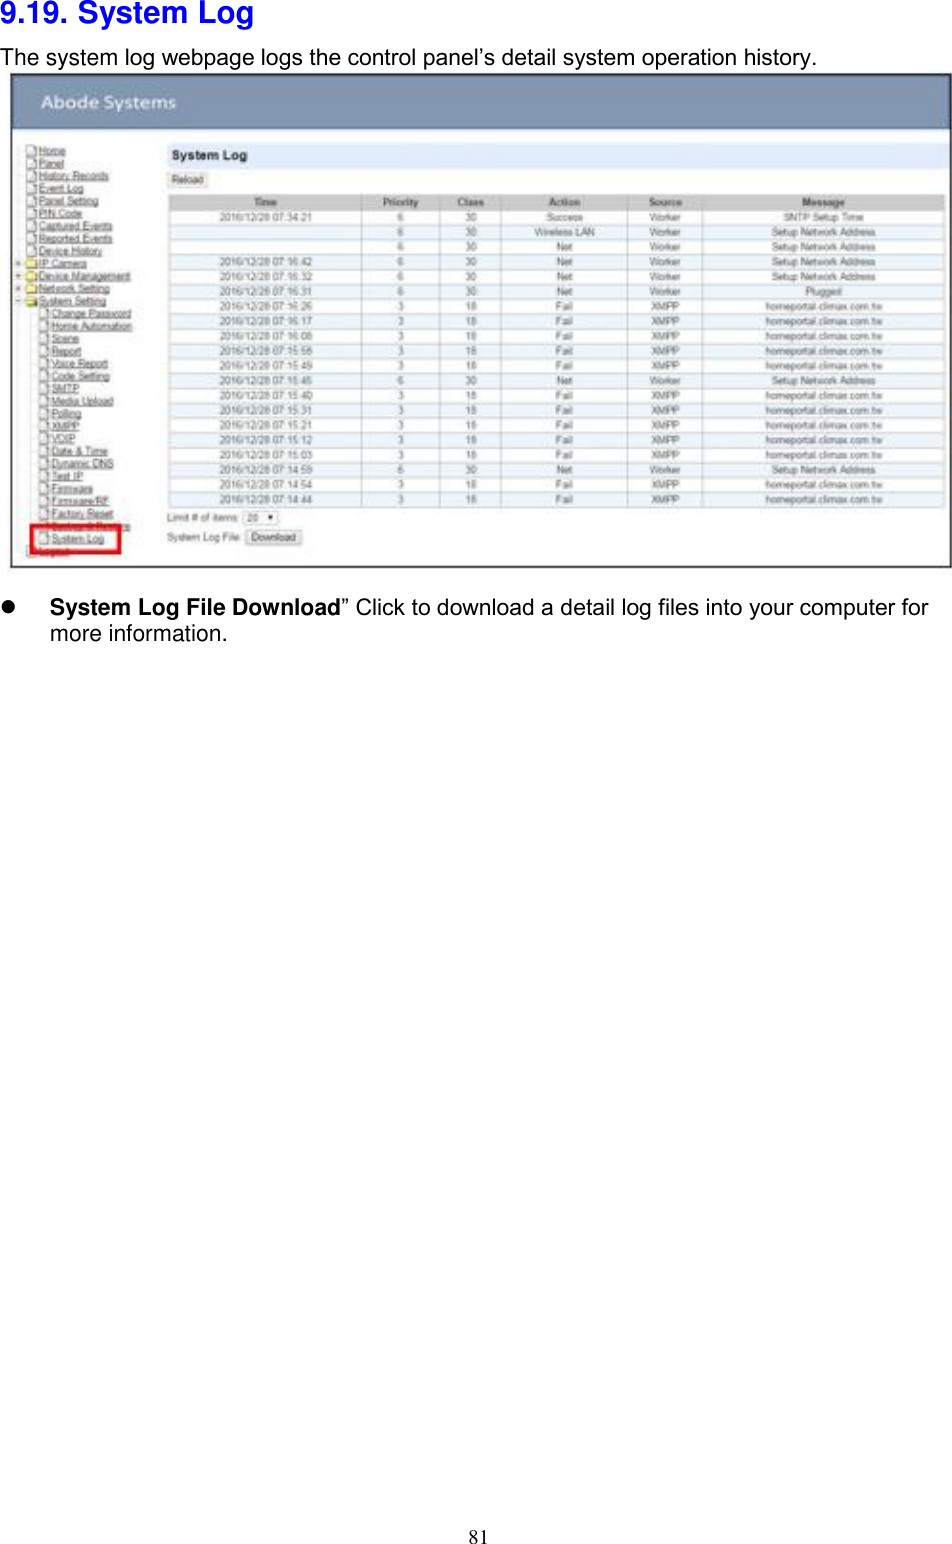 81  9.19. System Log The system log webpage logs the control panel’s detail system operation history.               System Log File Download” Click to download a detail log files into your computer for more information.